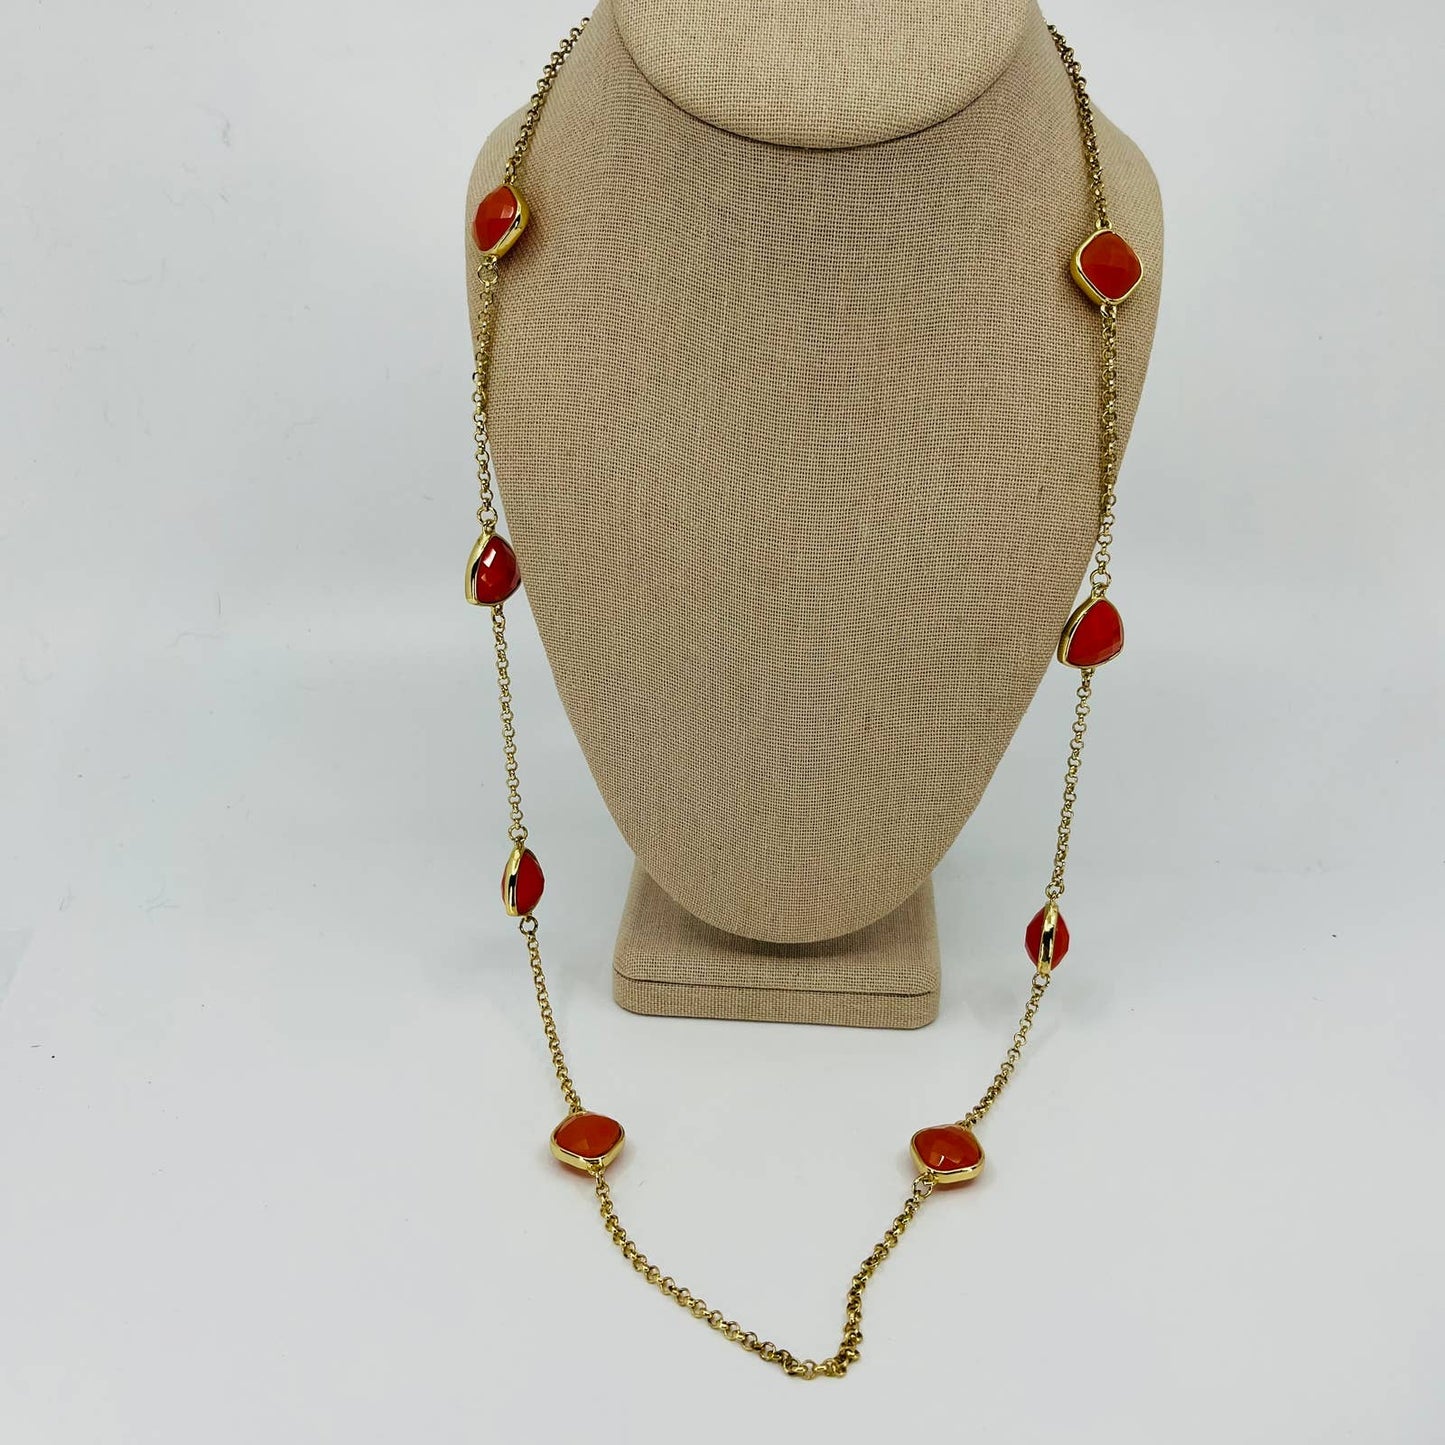 Vintage Modernist Chaps Faceted Coral Bead Gold Tone Necklace SB2